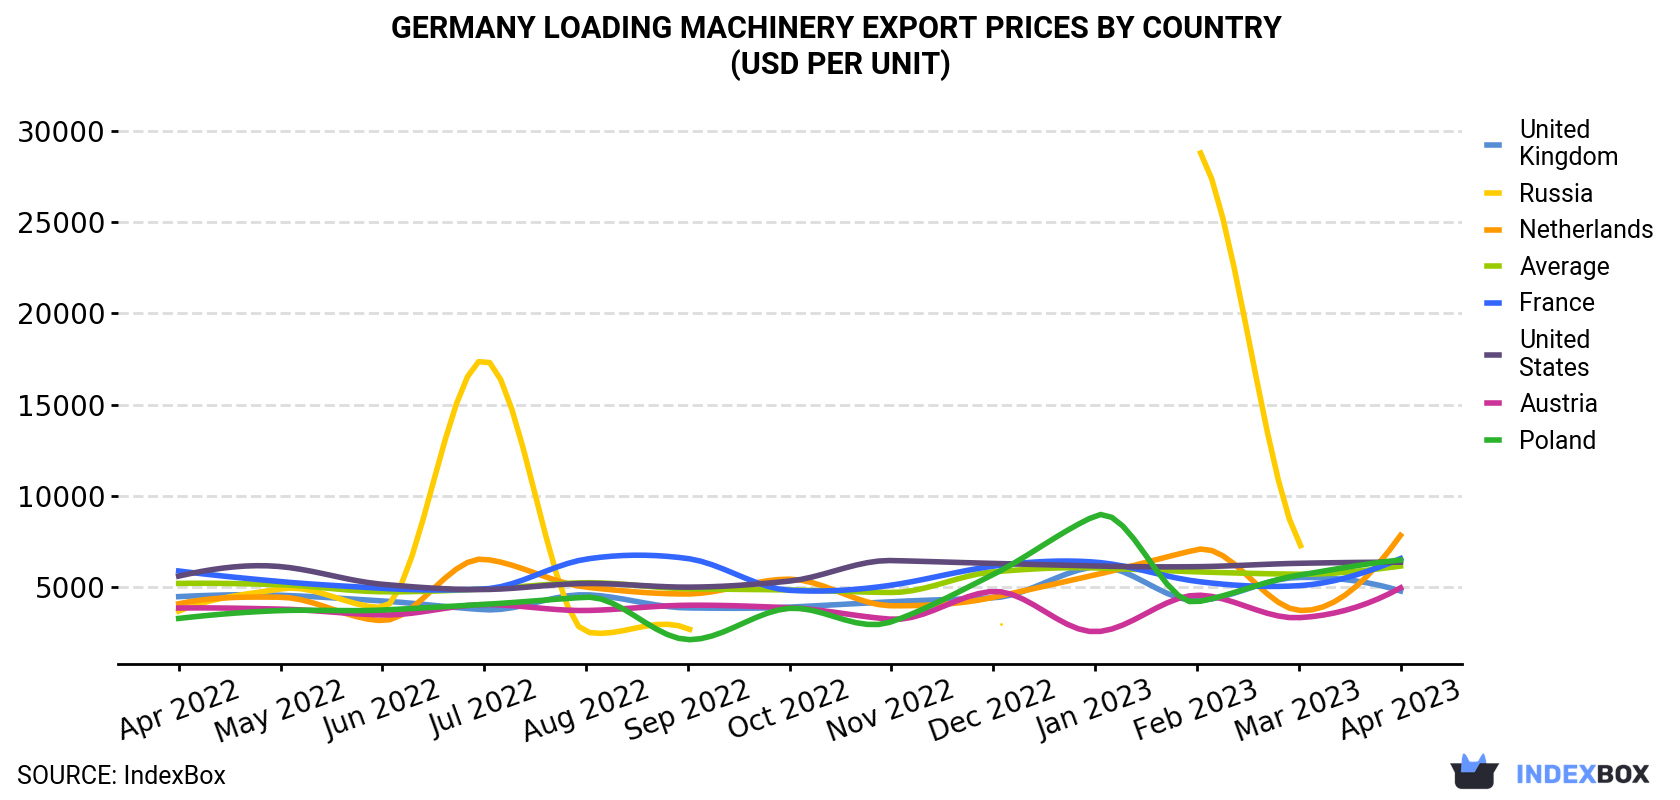 Germany Loading Machinery Export Prices By Country (USD Per Unit)